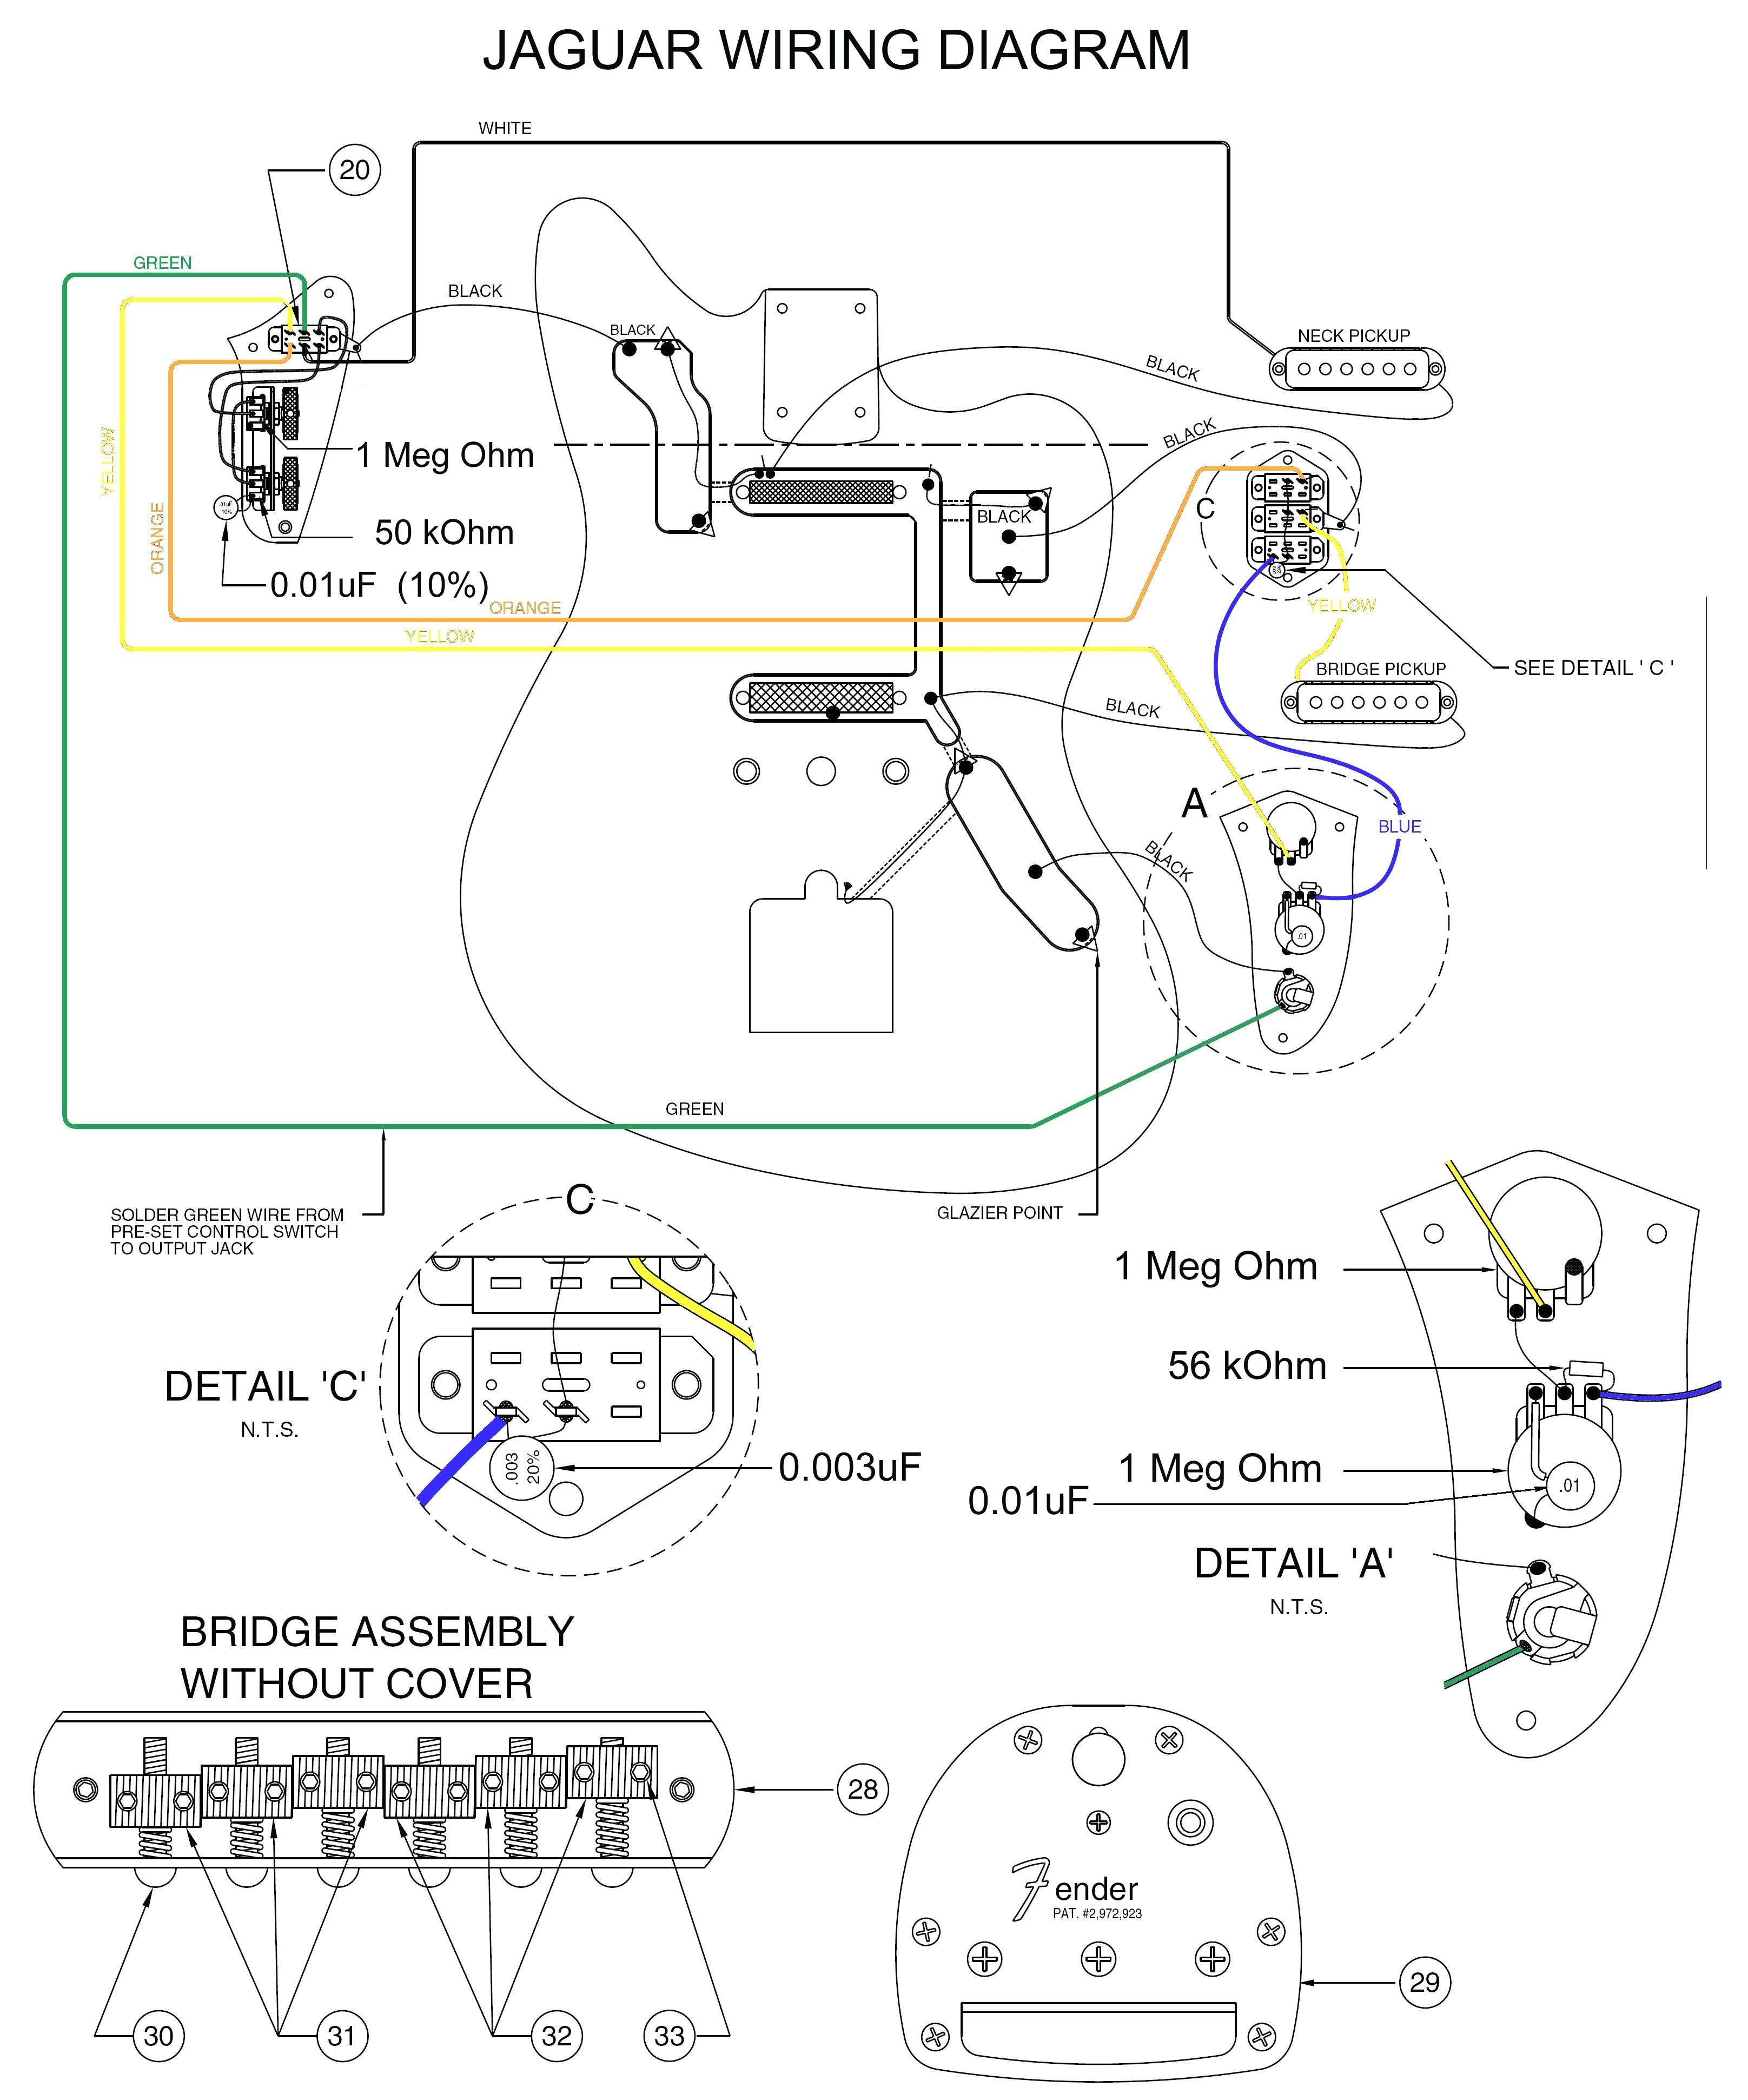 fender support wiring diagrams my wiring diagramfender p j b wiring diagram wiring diagram list fender support wiring